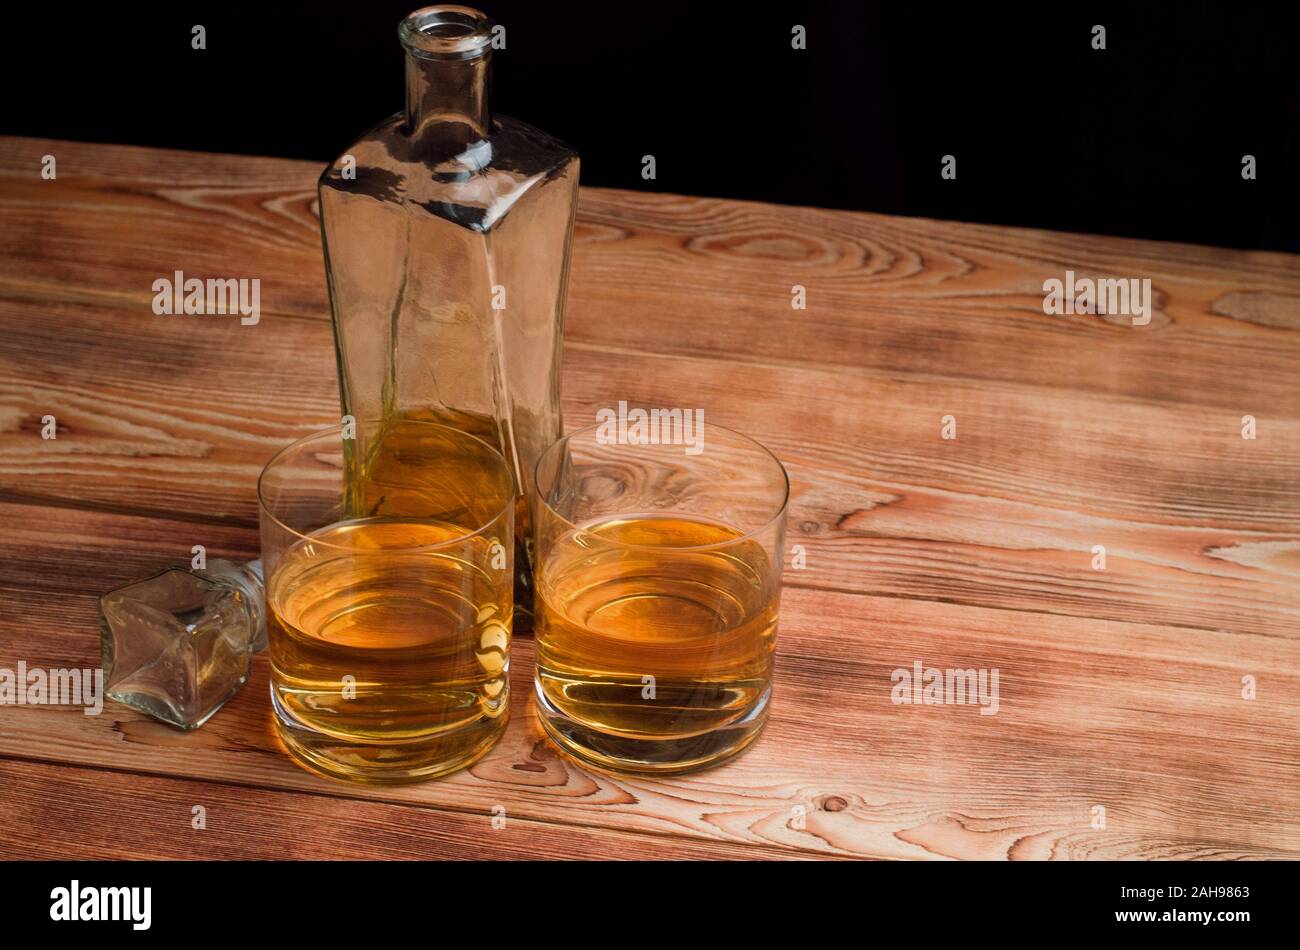 Two glasses of whiskey stand next to the decanter on a wooden table. Glasses with whiskey without ice. Stock Photo